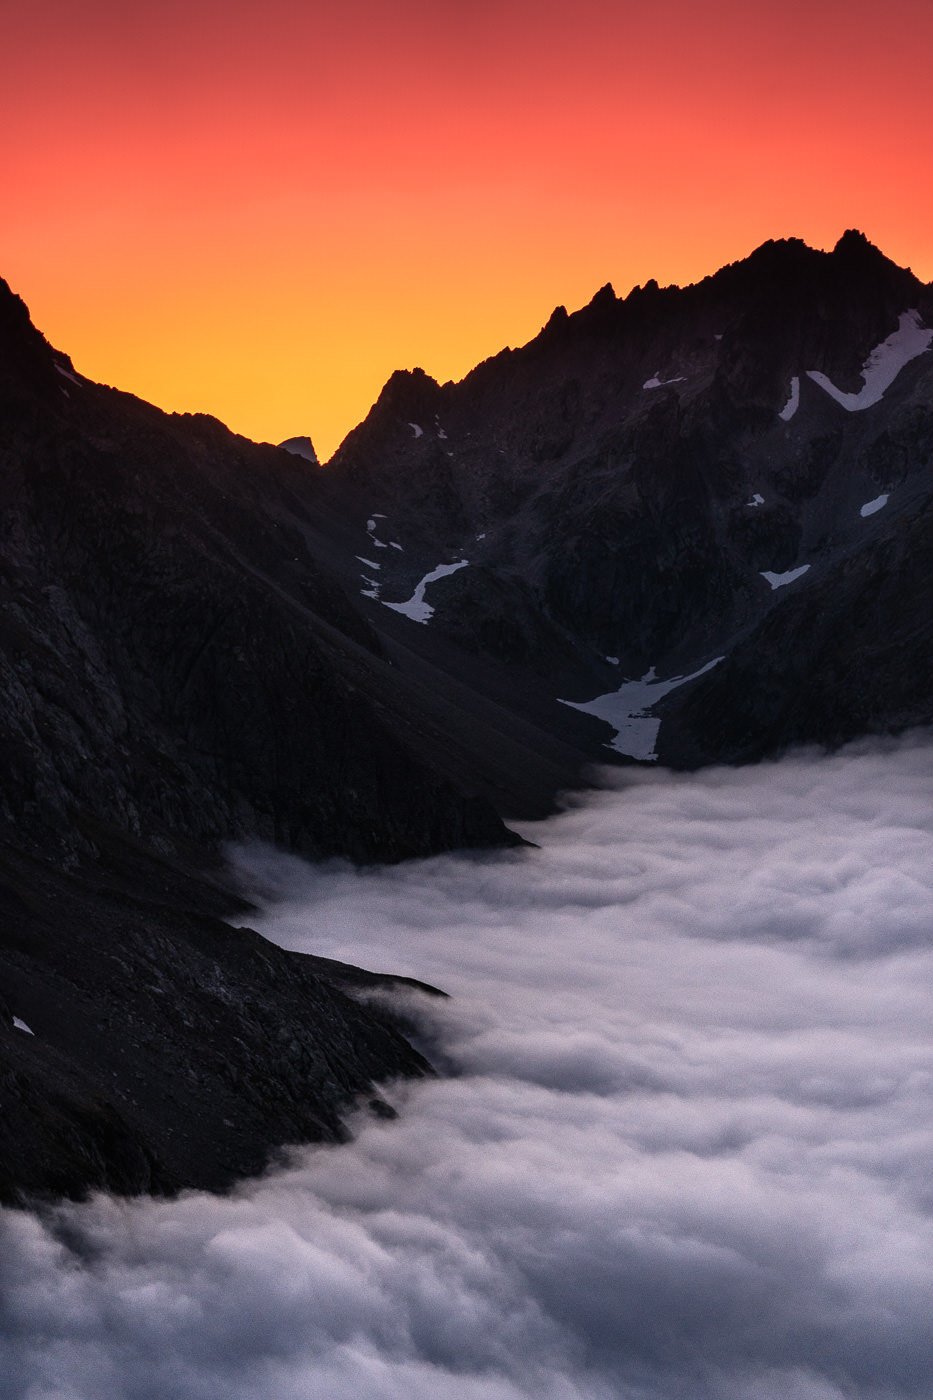 a view of a mountain range with a sunset in the background.